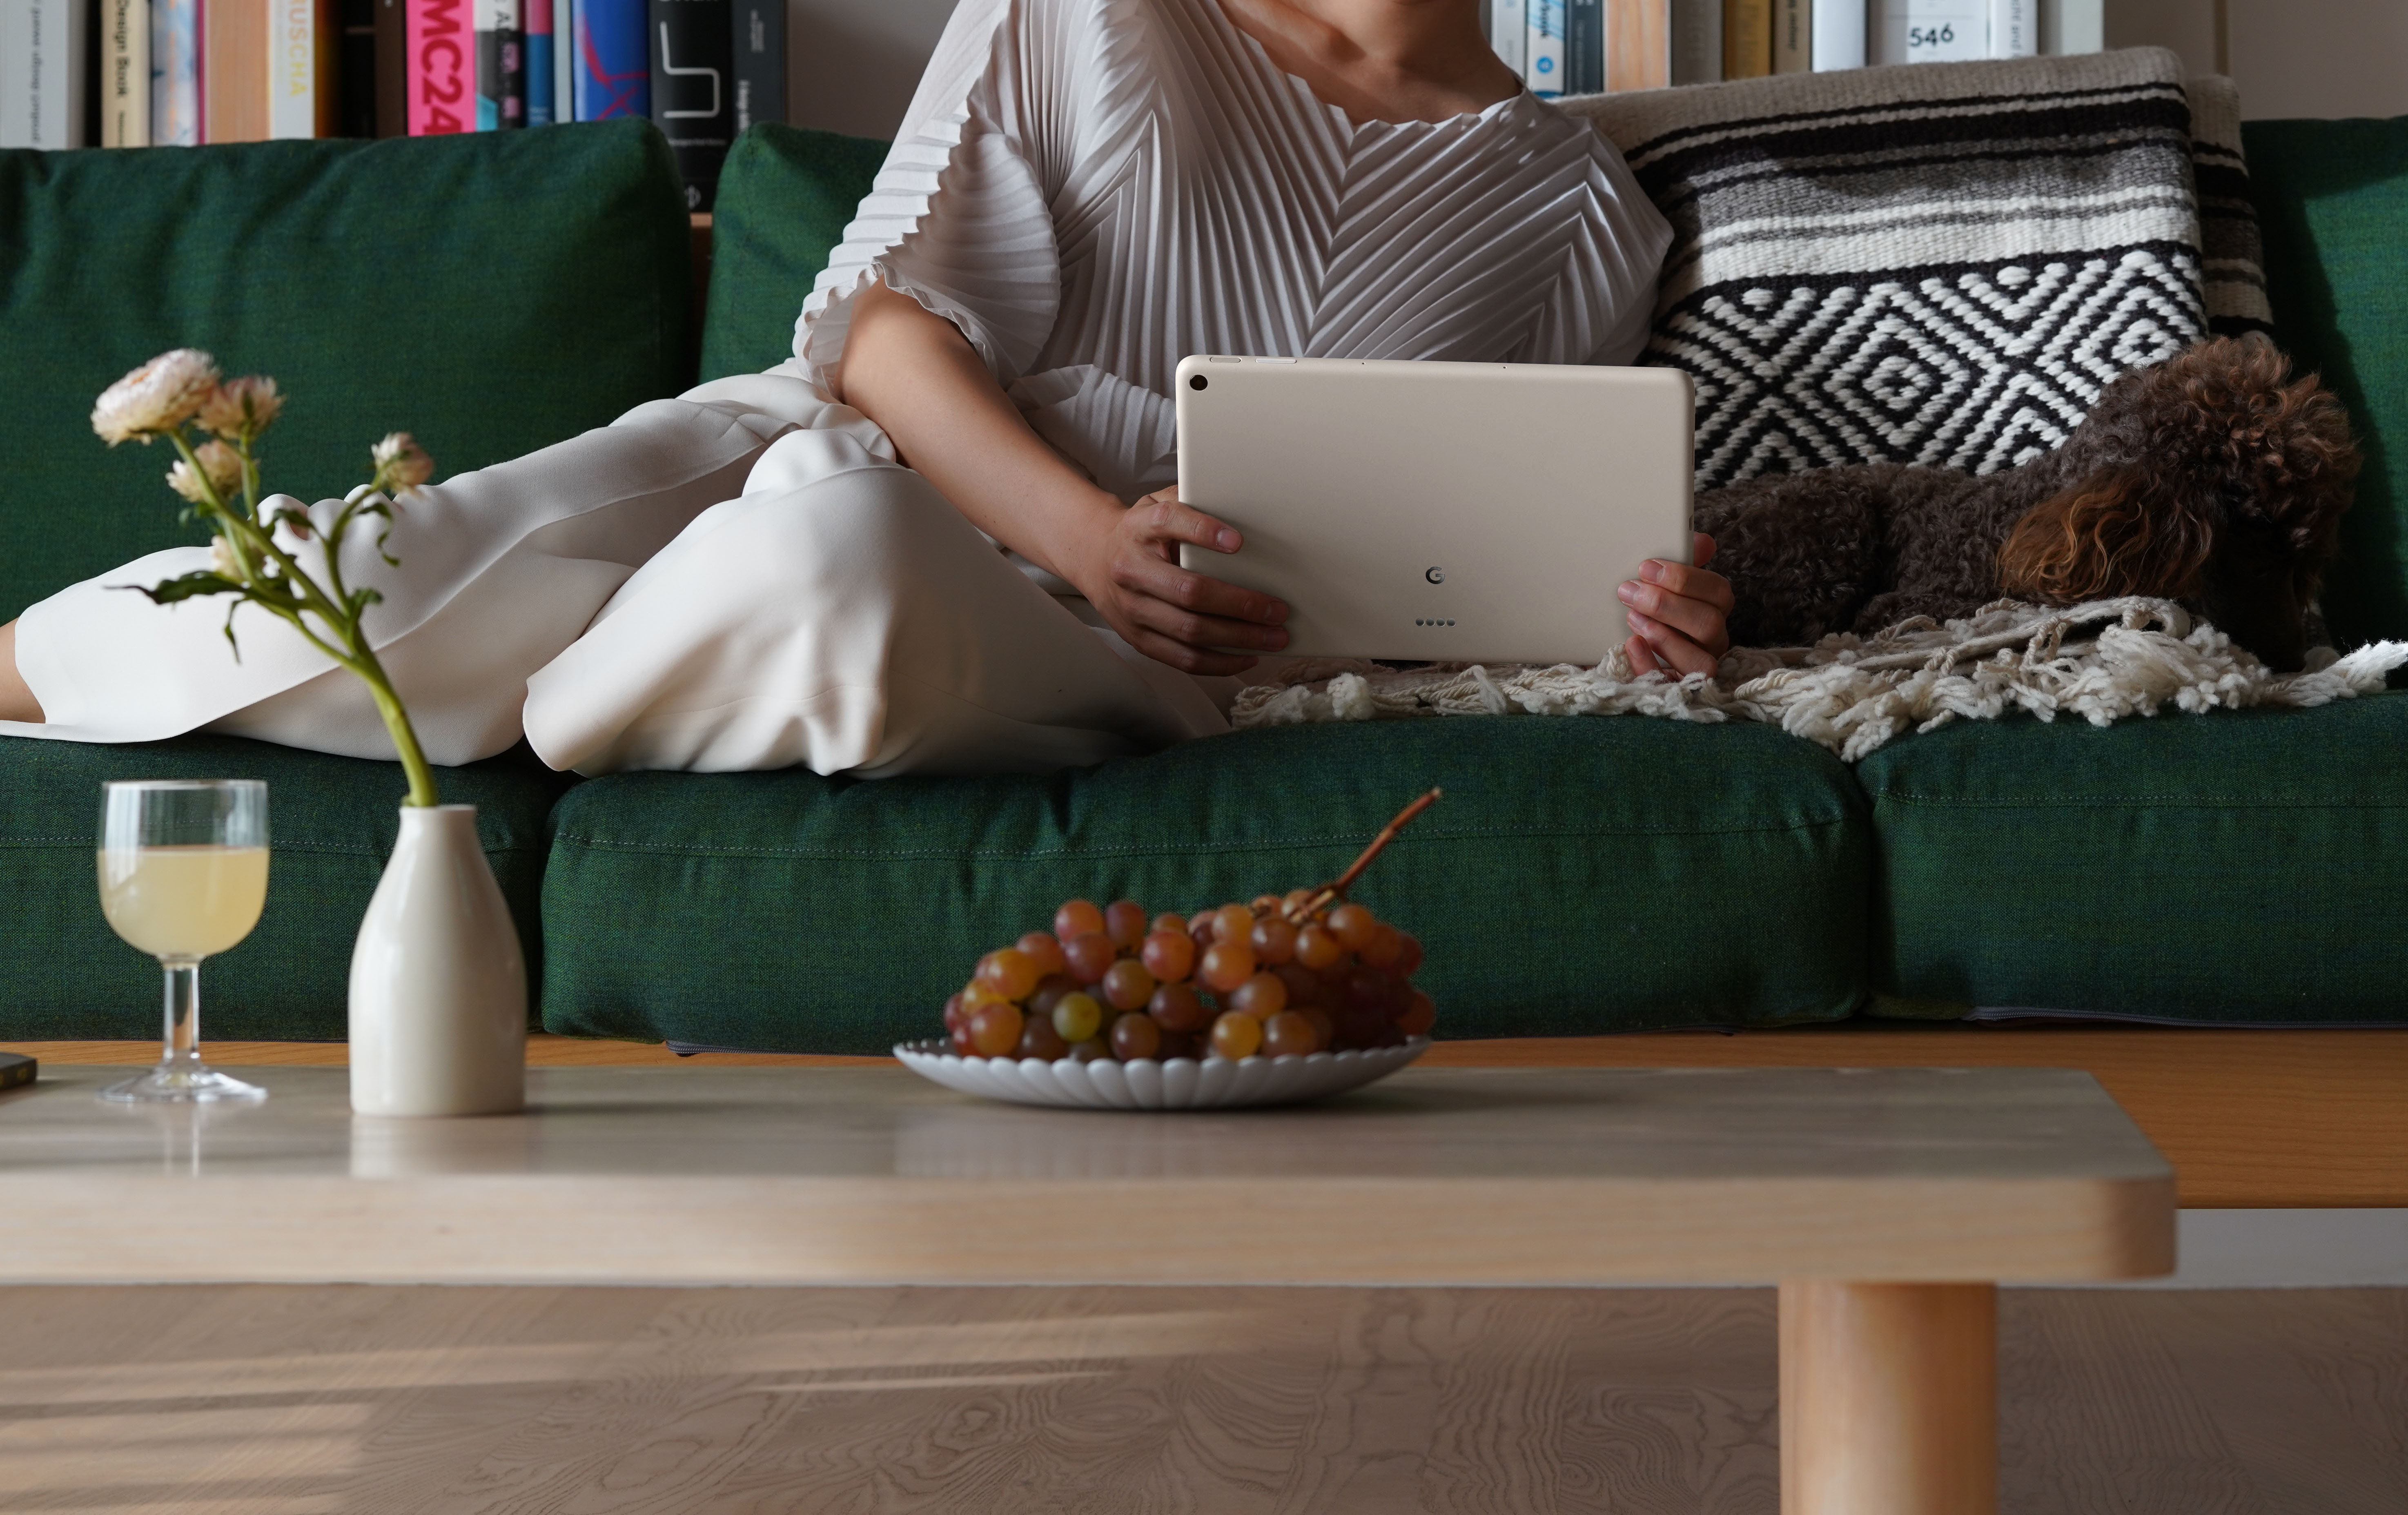 A person holding a white Pixel Tablet while laying on a green couch with a plate of grapes on a table in front of them. The back of the Tablet is facing out and there is a camera on the top left of the device's rear.